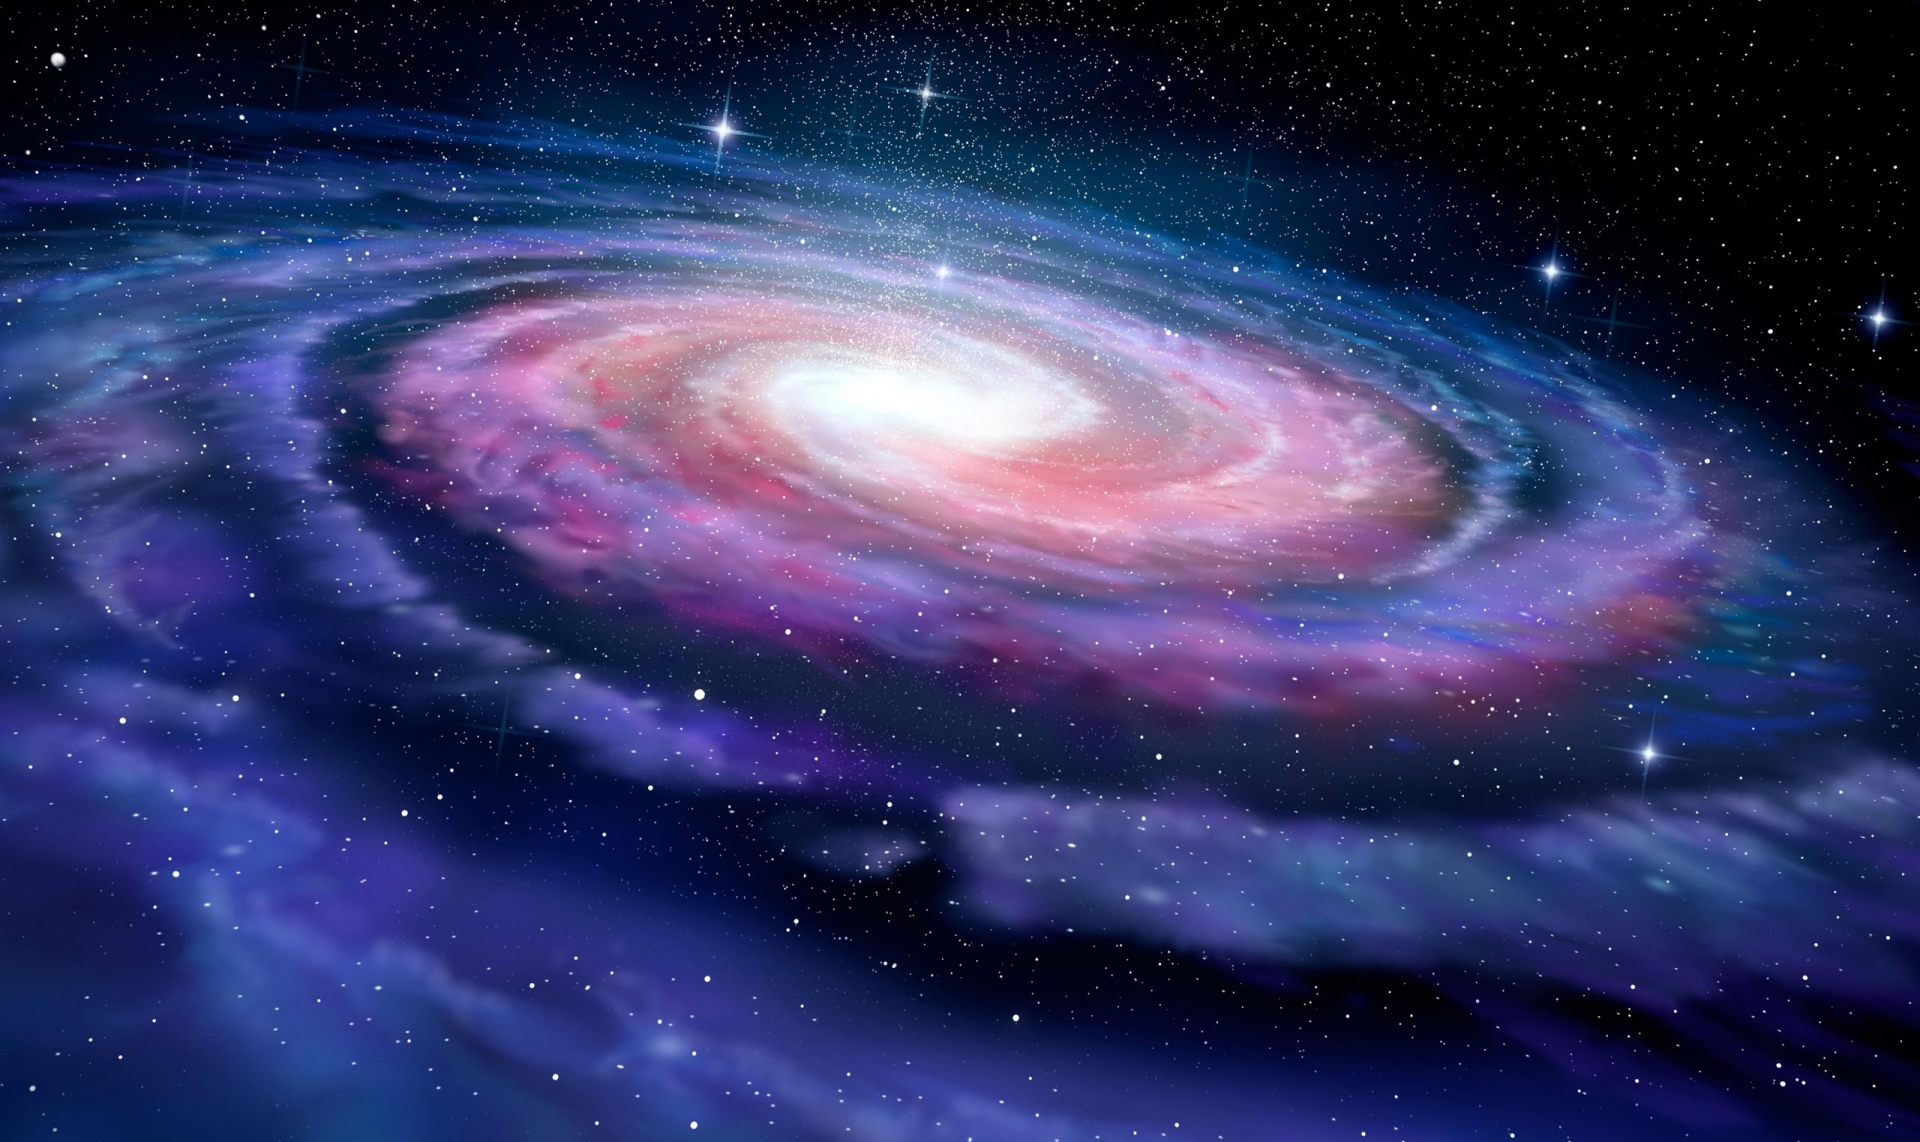 TOP 7 interesting facts about the Milky Way